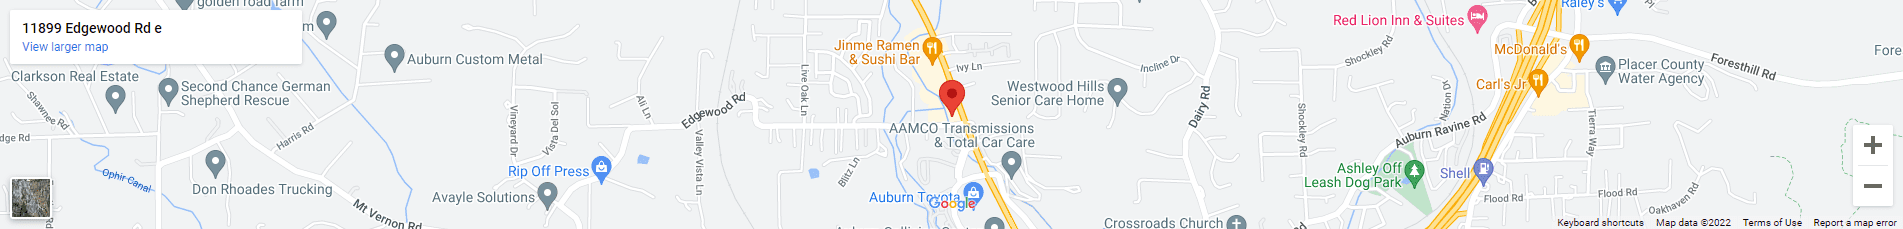 A map of the location of aamco transmissions and total car care.